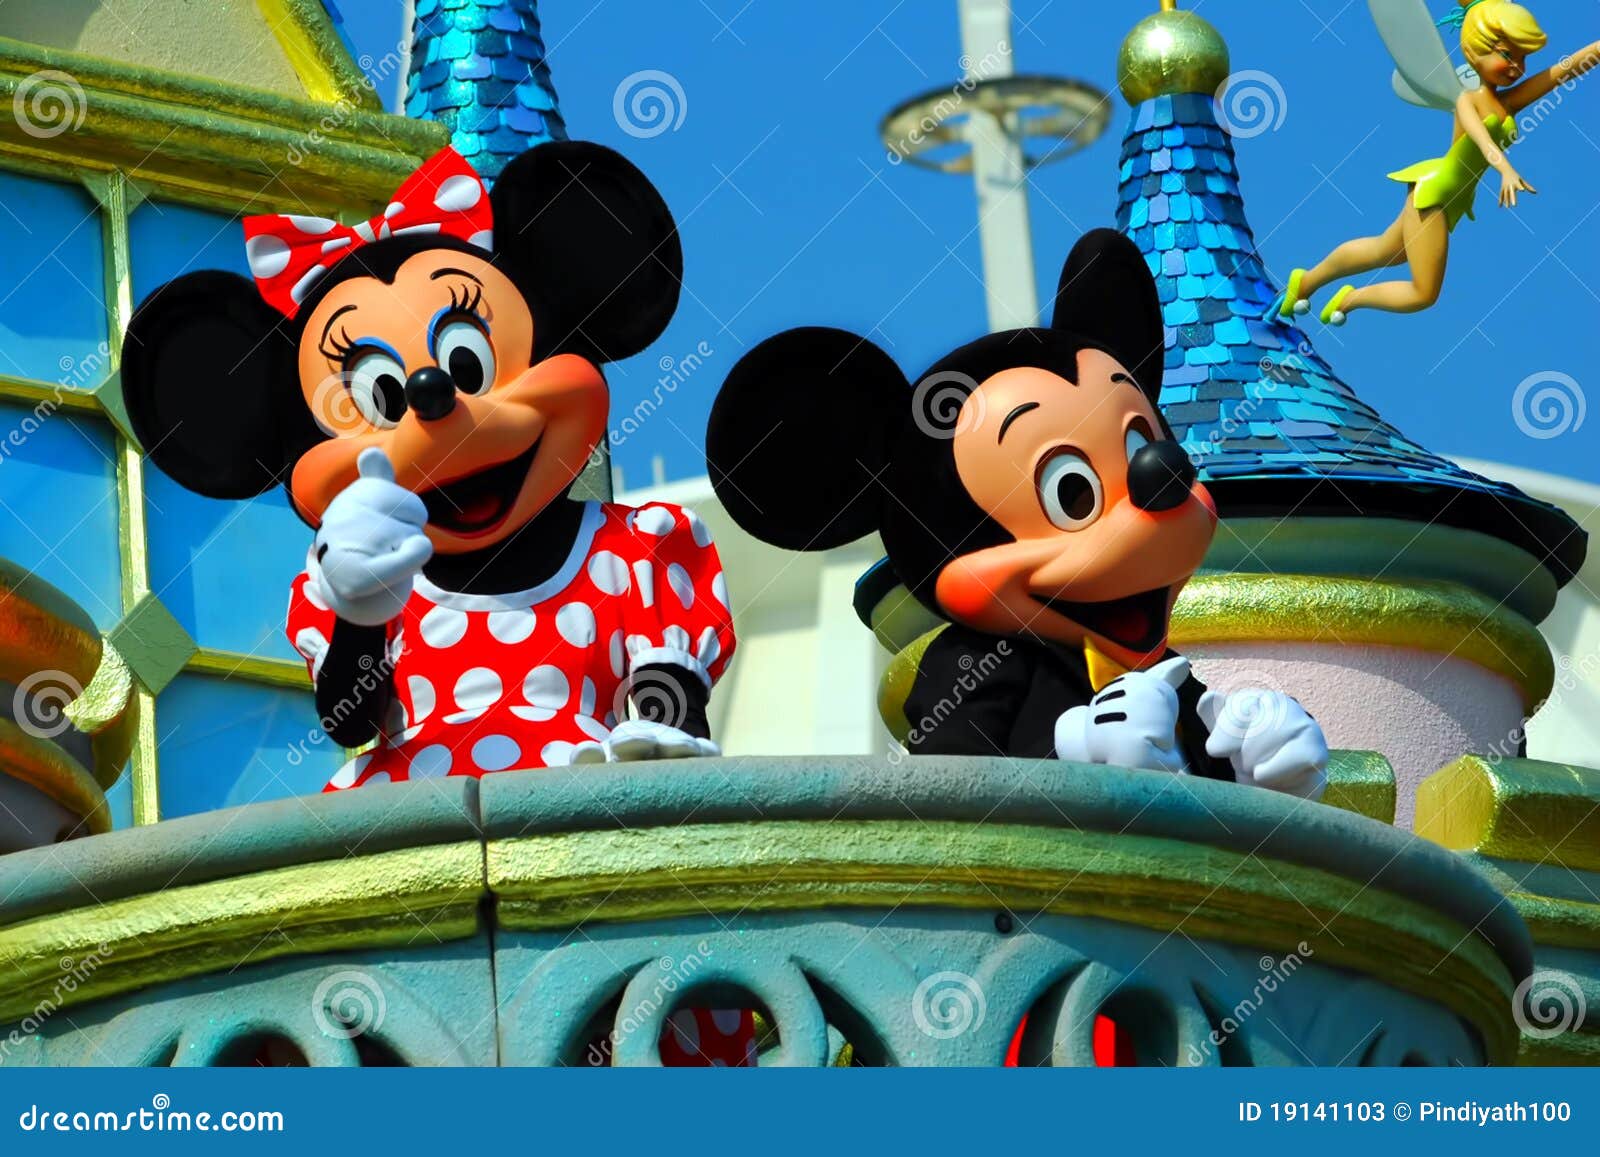 Mickey and minnie mouse editorial stock photo. Image of show ...